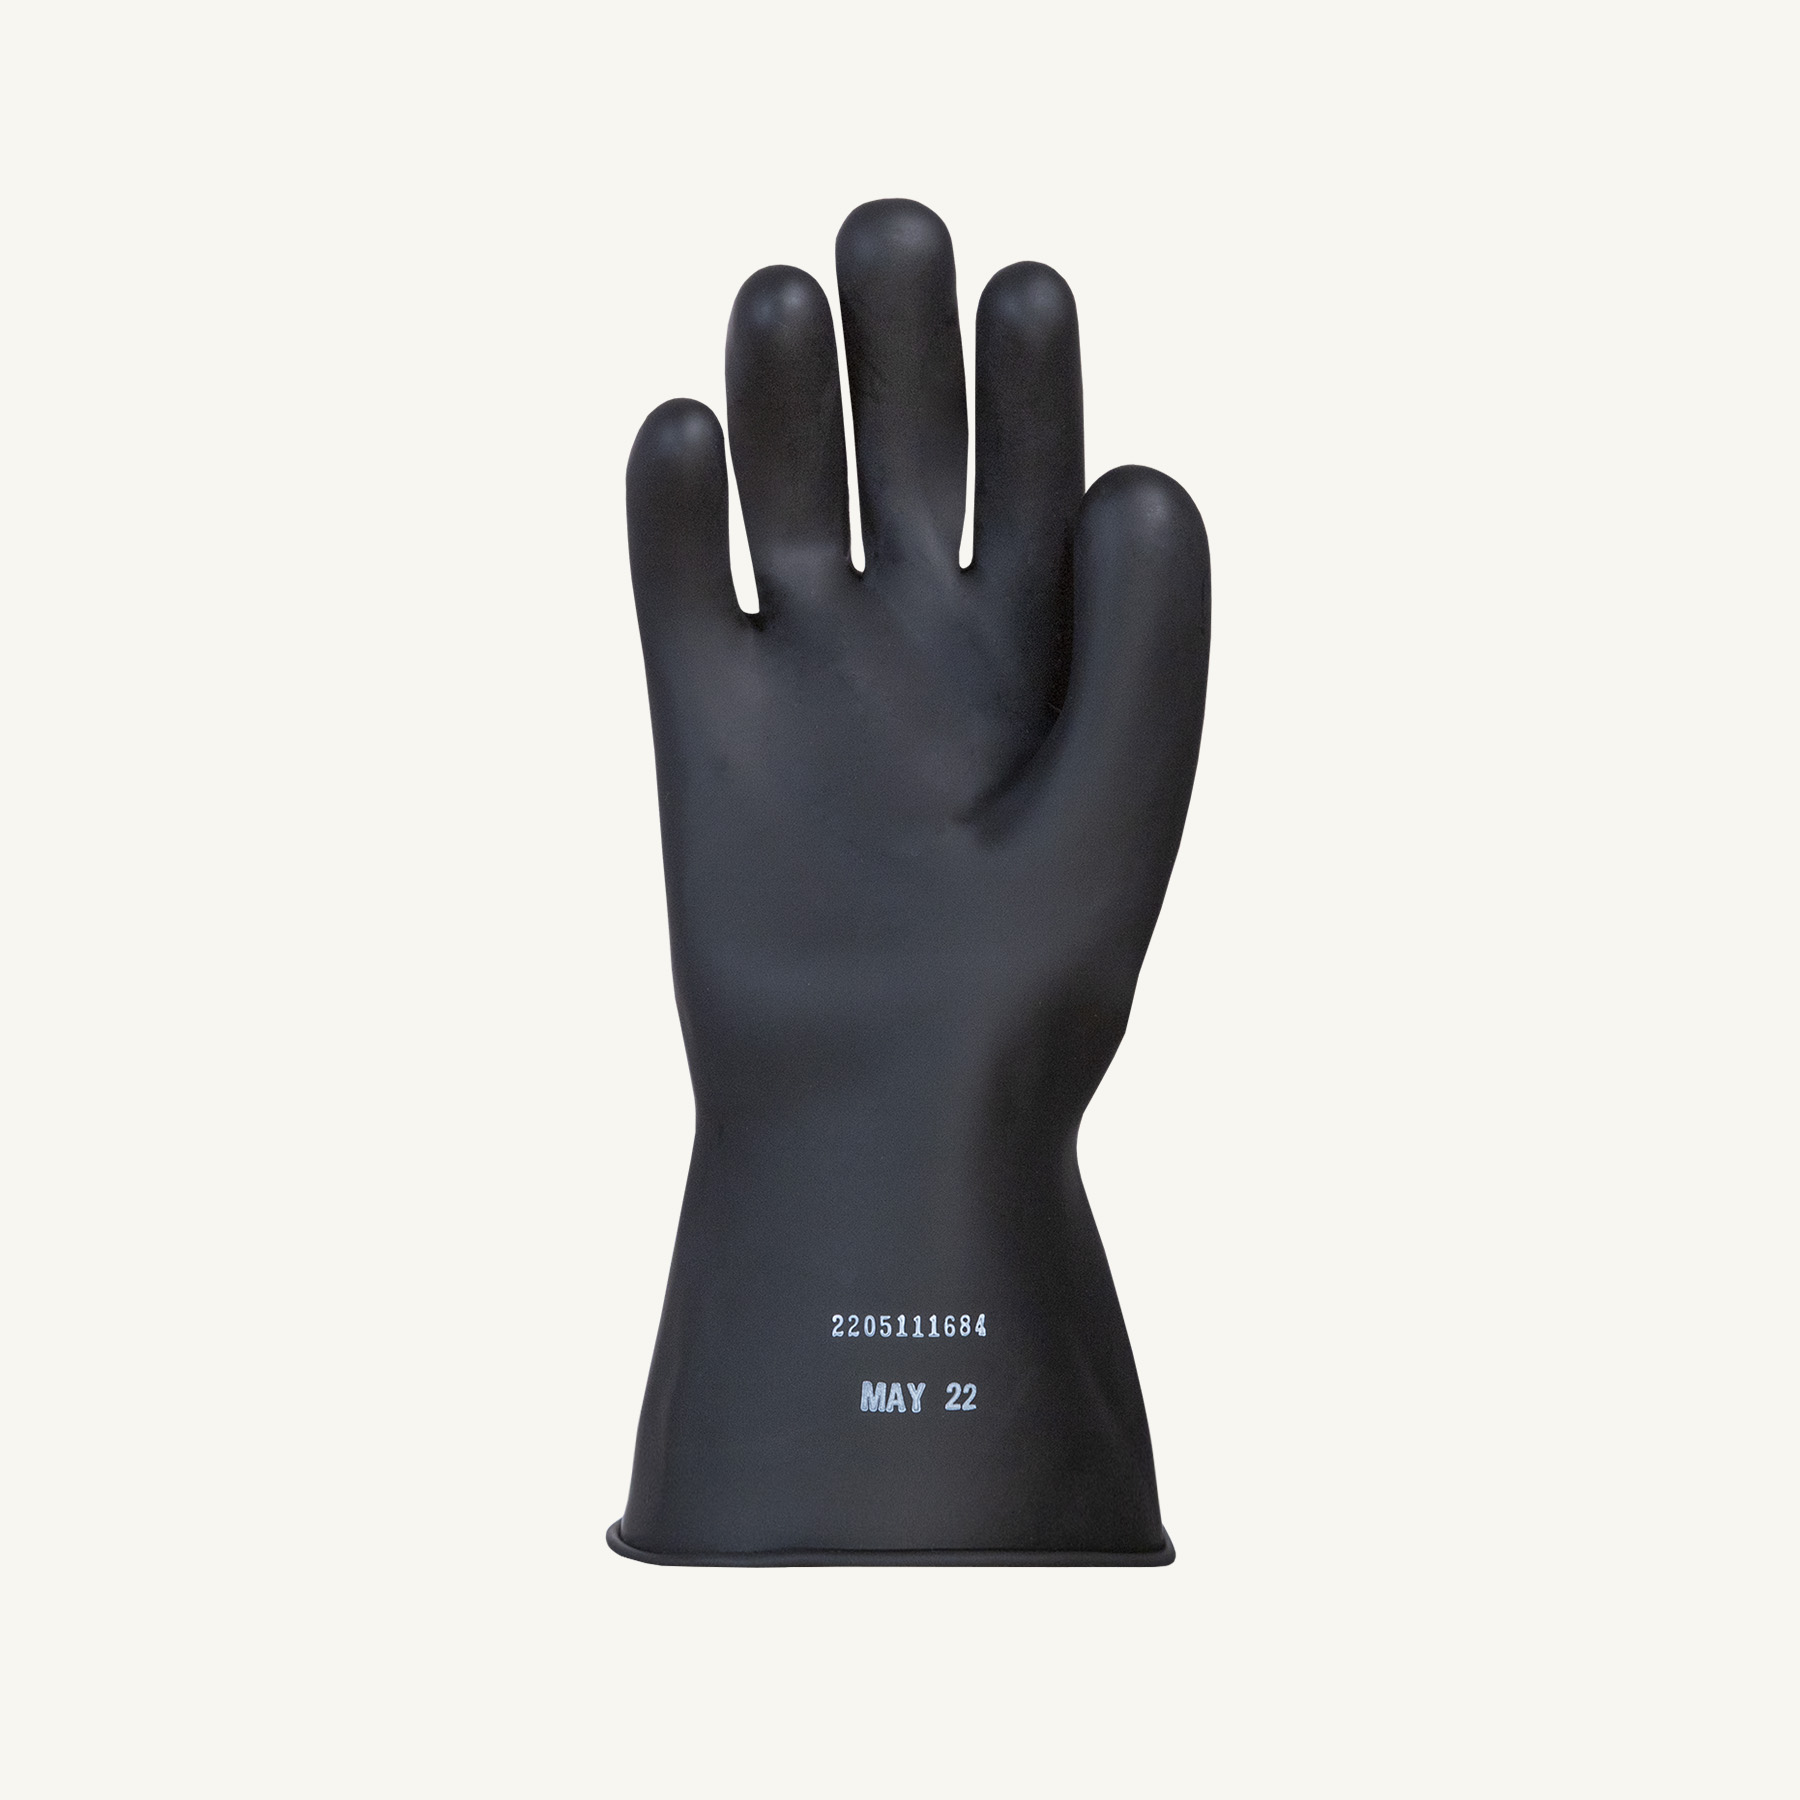 Superior Glove® Line Pro NR00B28 Black 11-inch  Insulating Rubber Gloves, Class 00